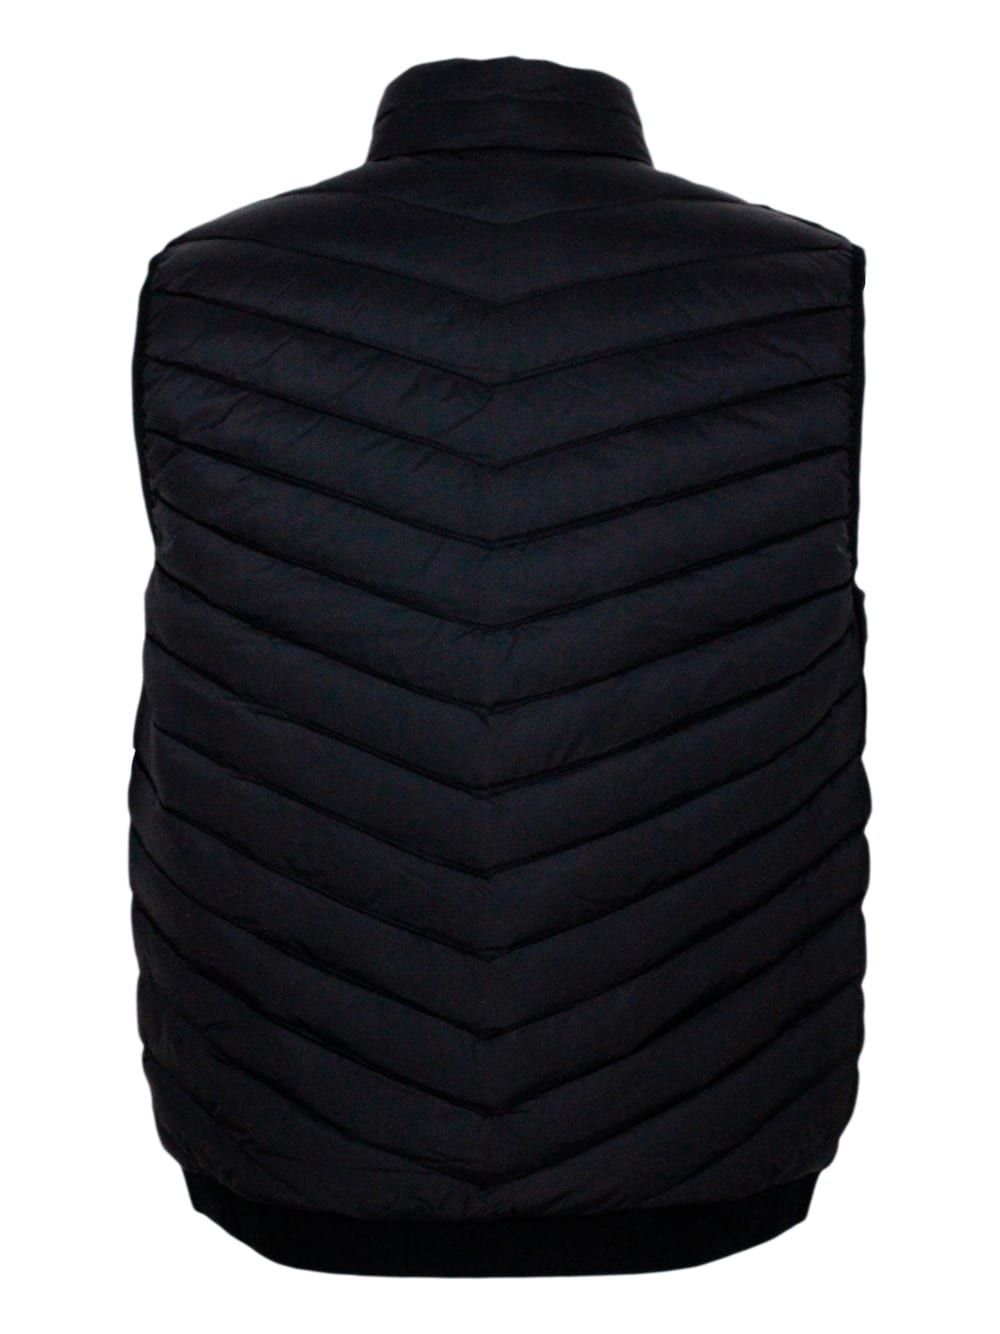 Shop Armani Collezioni Sleeveless Vest In Light Down Jacket With Logoed And Elasticated Bottom And Zip Closure In Black